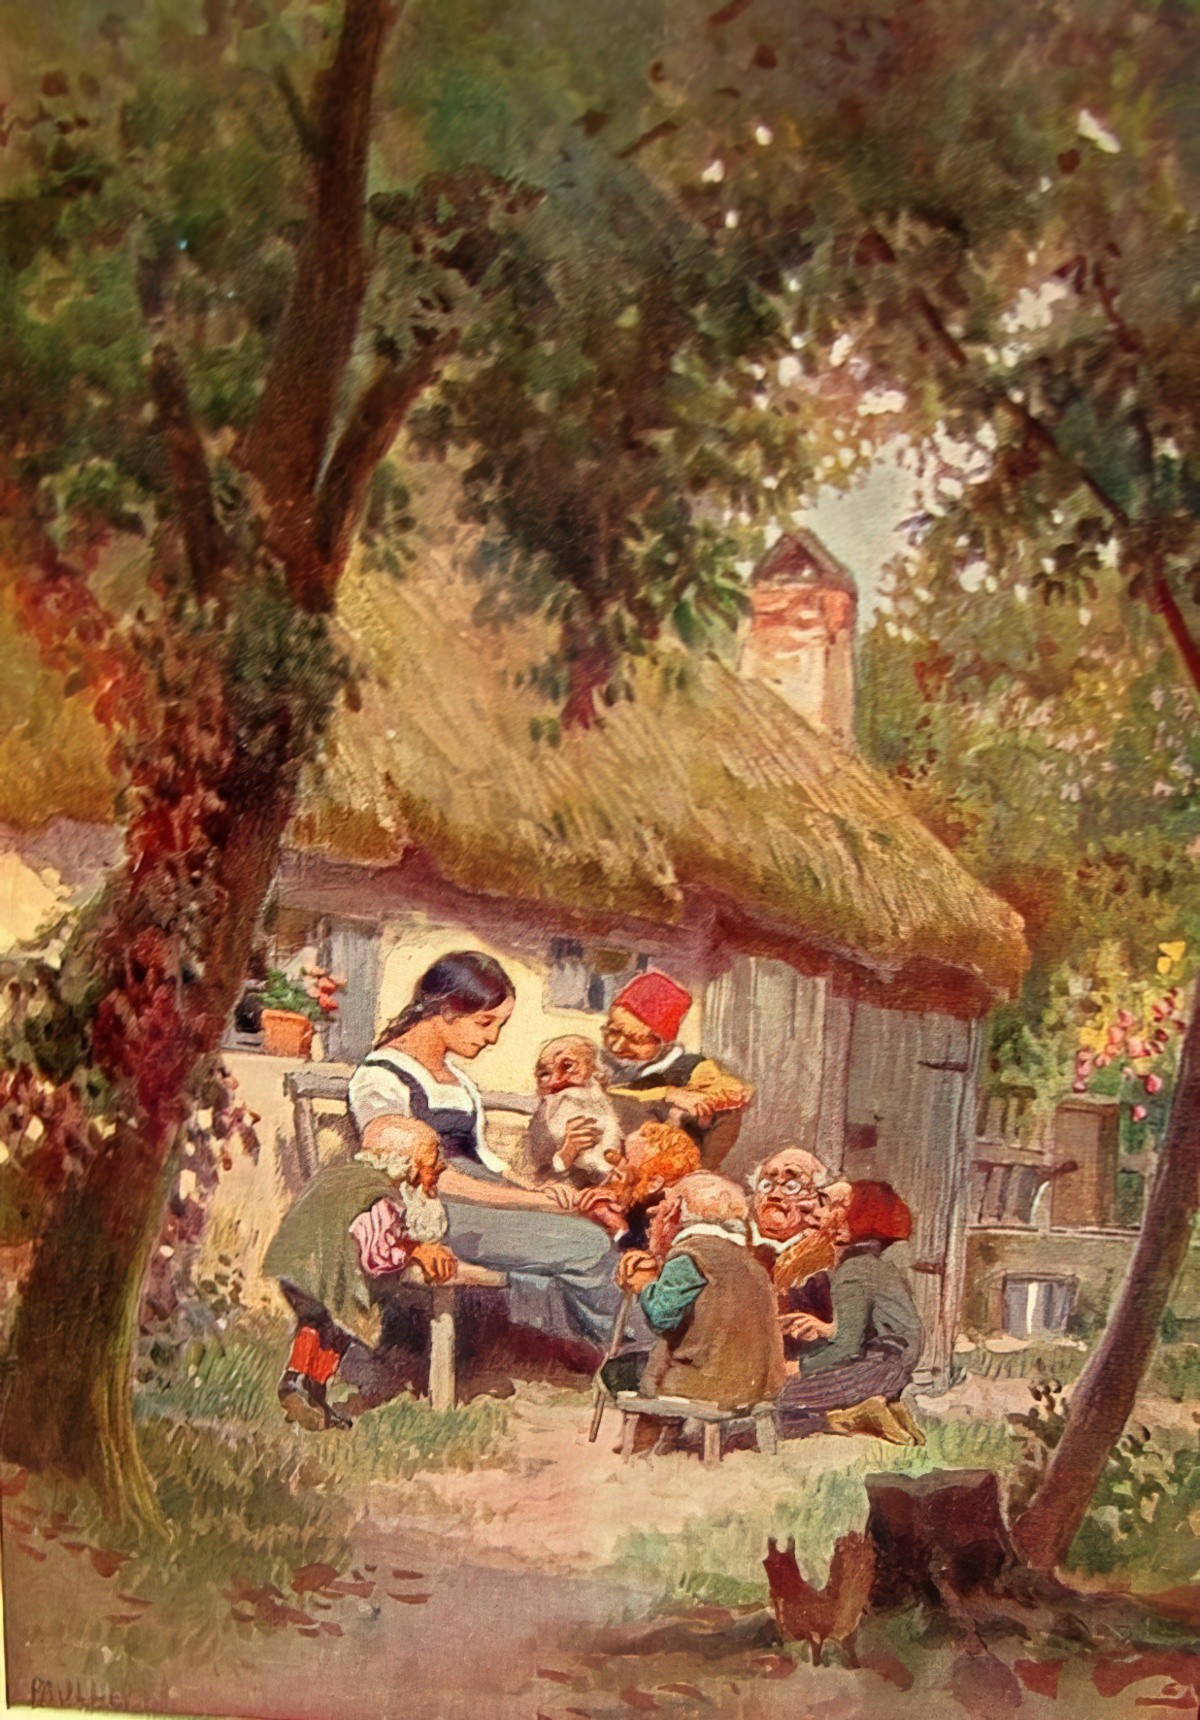 Snow White Fairy Tale History and Storytelling